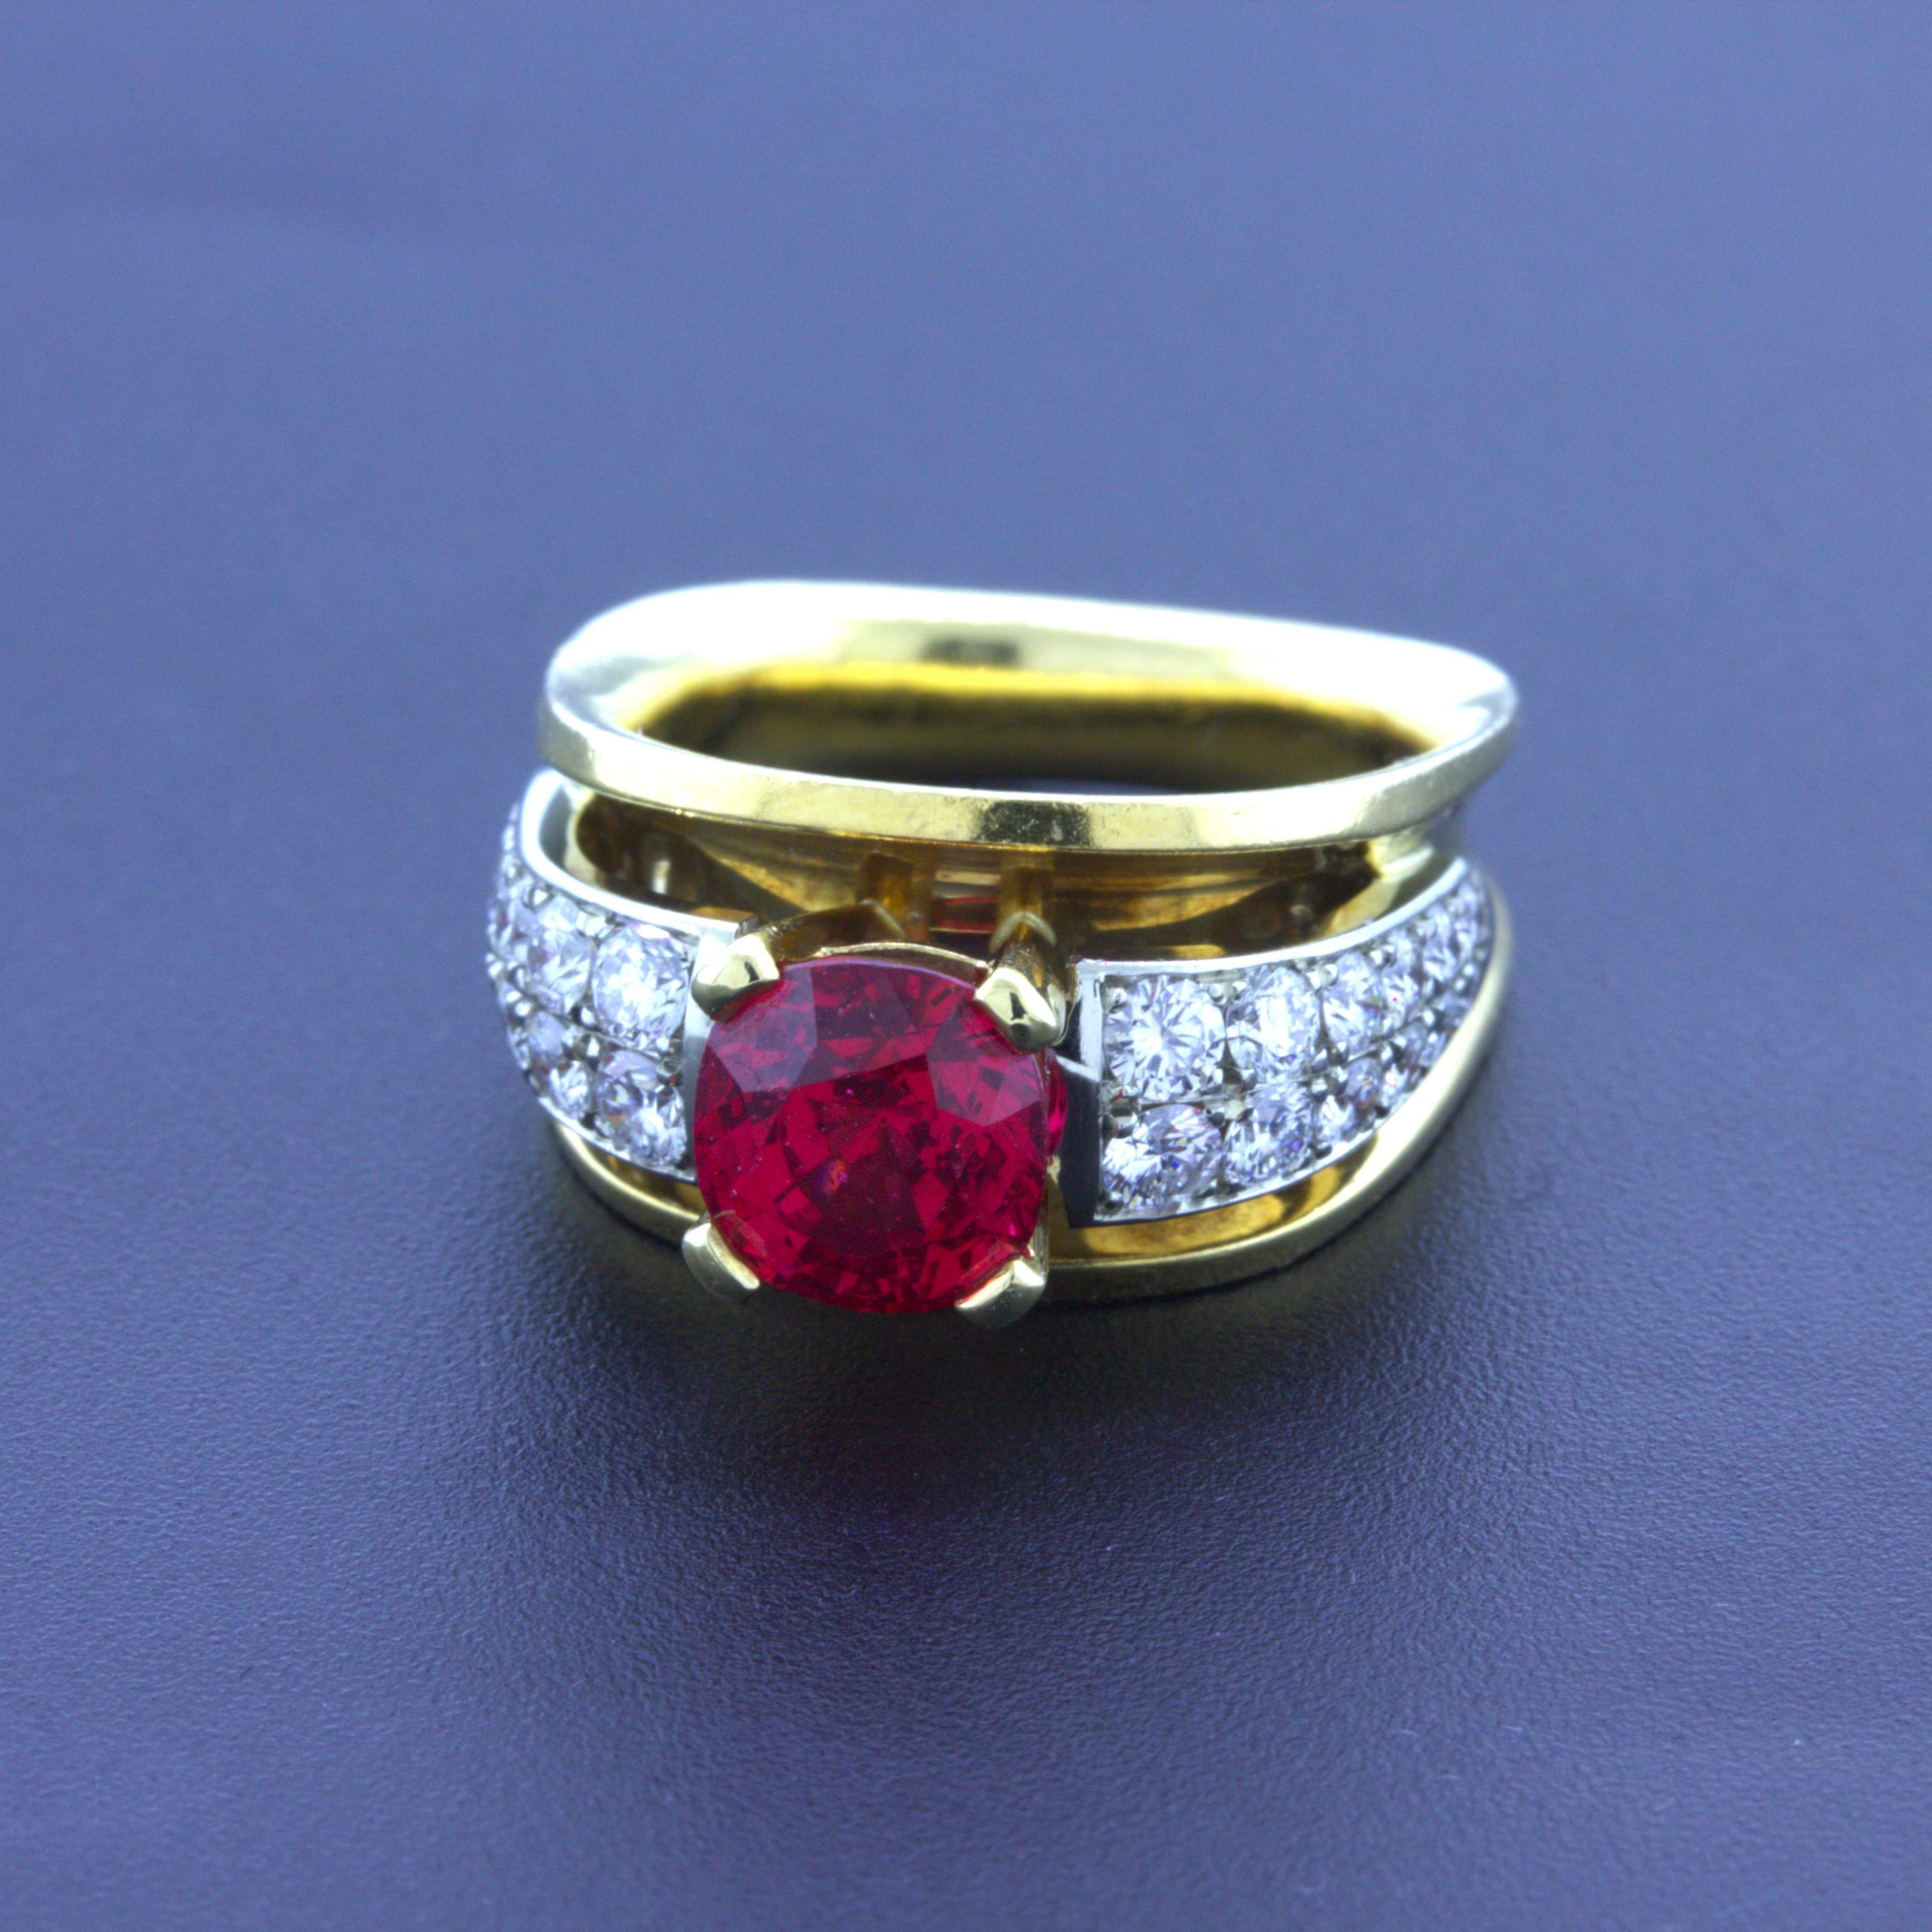 Cushion Cut Exceptional 2.28 Carat Burmese Red Spinel Diamond 18K Yellow Gold Ring, GIA Cert For Sale